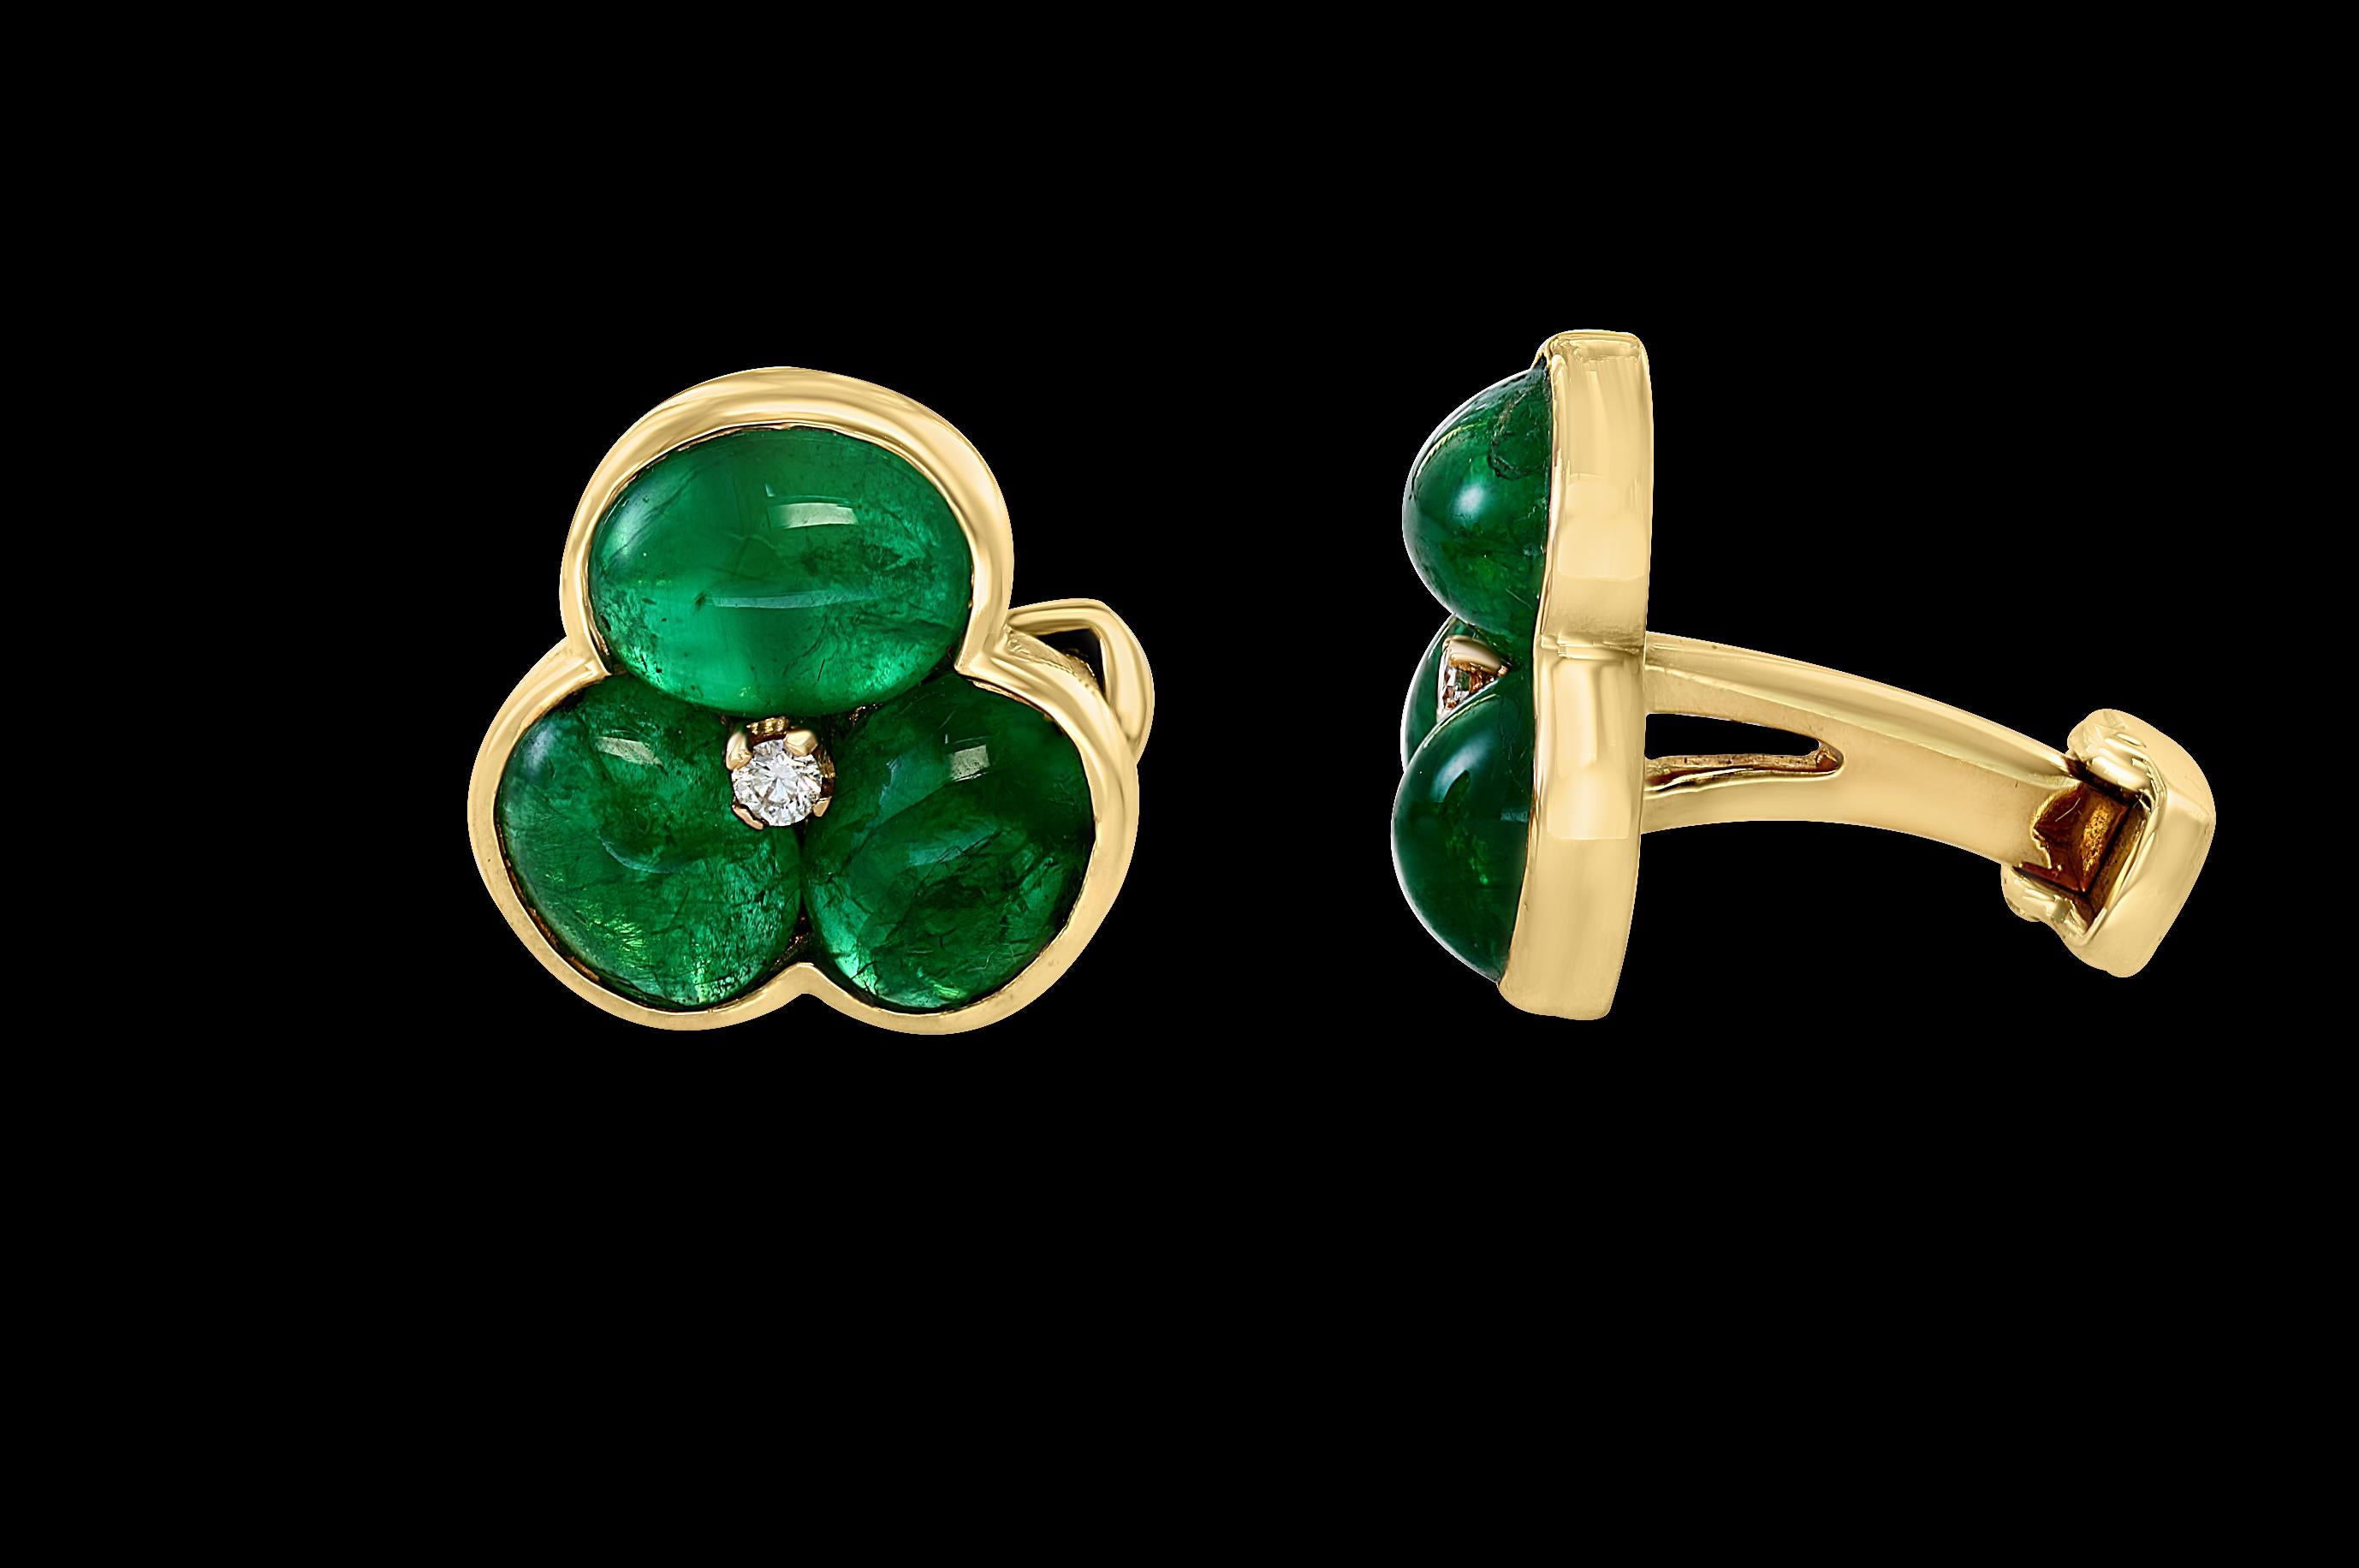 14 Carat Emerald Cabochon and Diamond 14 Karat Yellow Gold Cufflinks
The epitome of subtle elegance, these cabochon gemstone cufflinks are the perfect everyday piece for any occasion --from days at the office to dinner parties and black tie events.